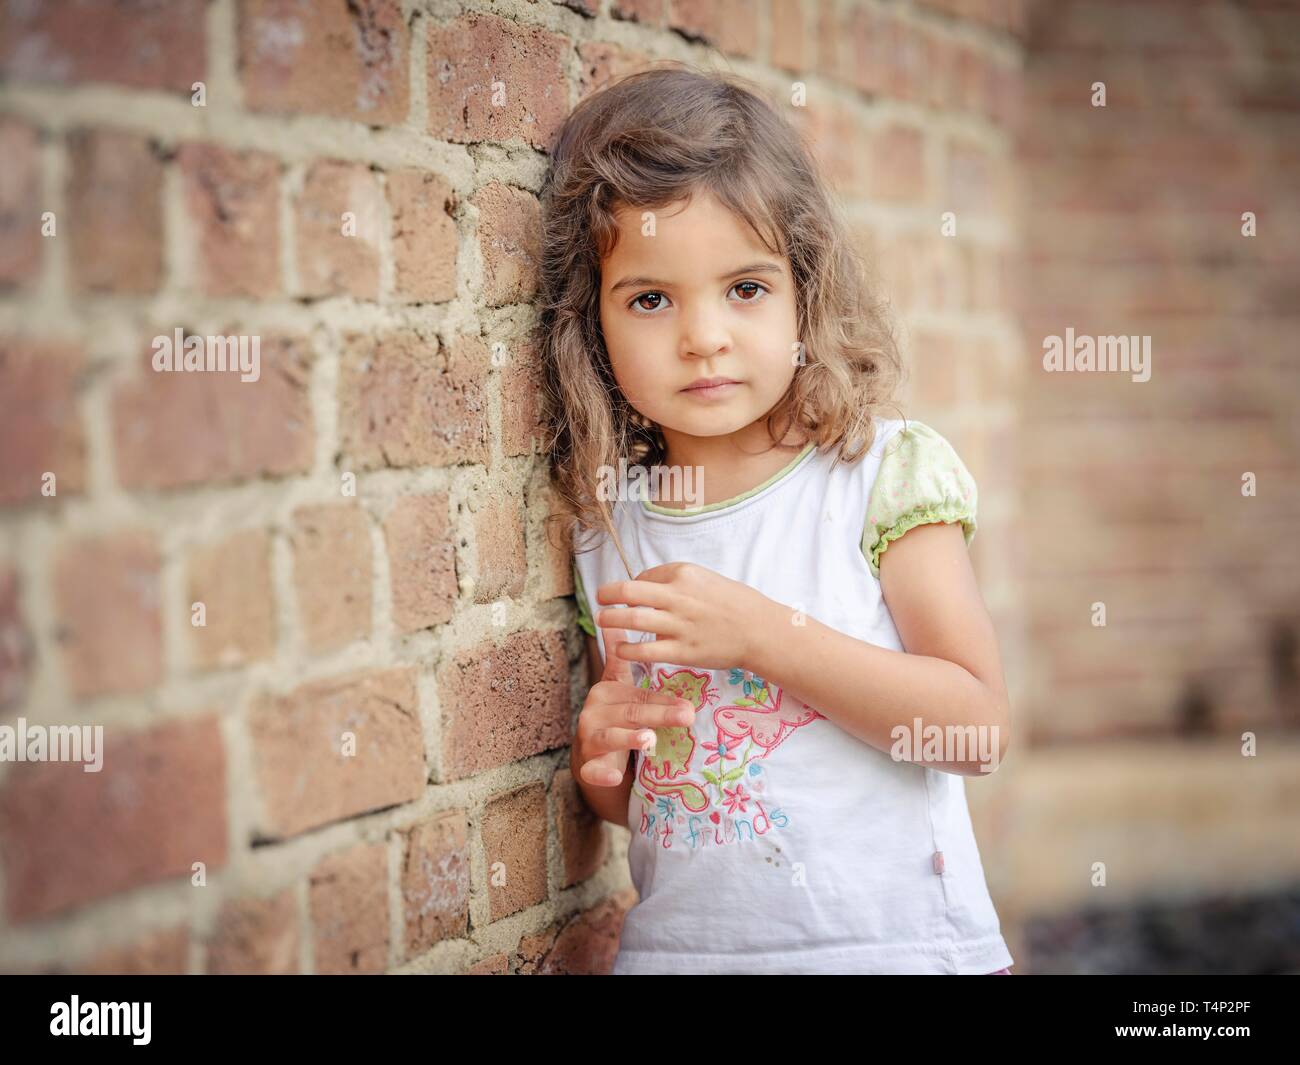 Girl, 3 years old, leaning against a wall, portrait, Germany Stock Photo